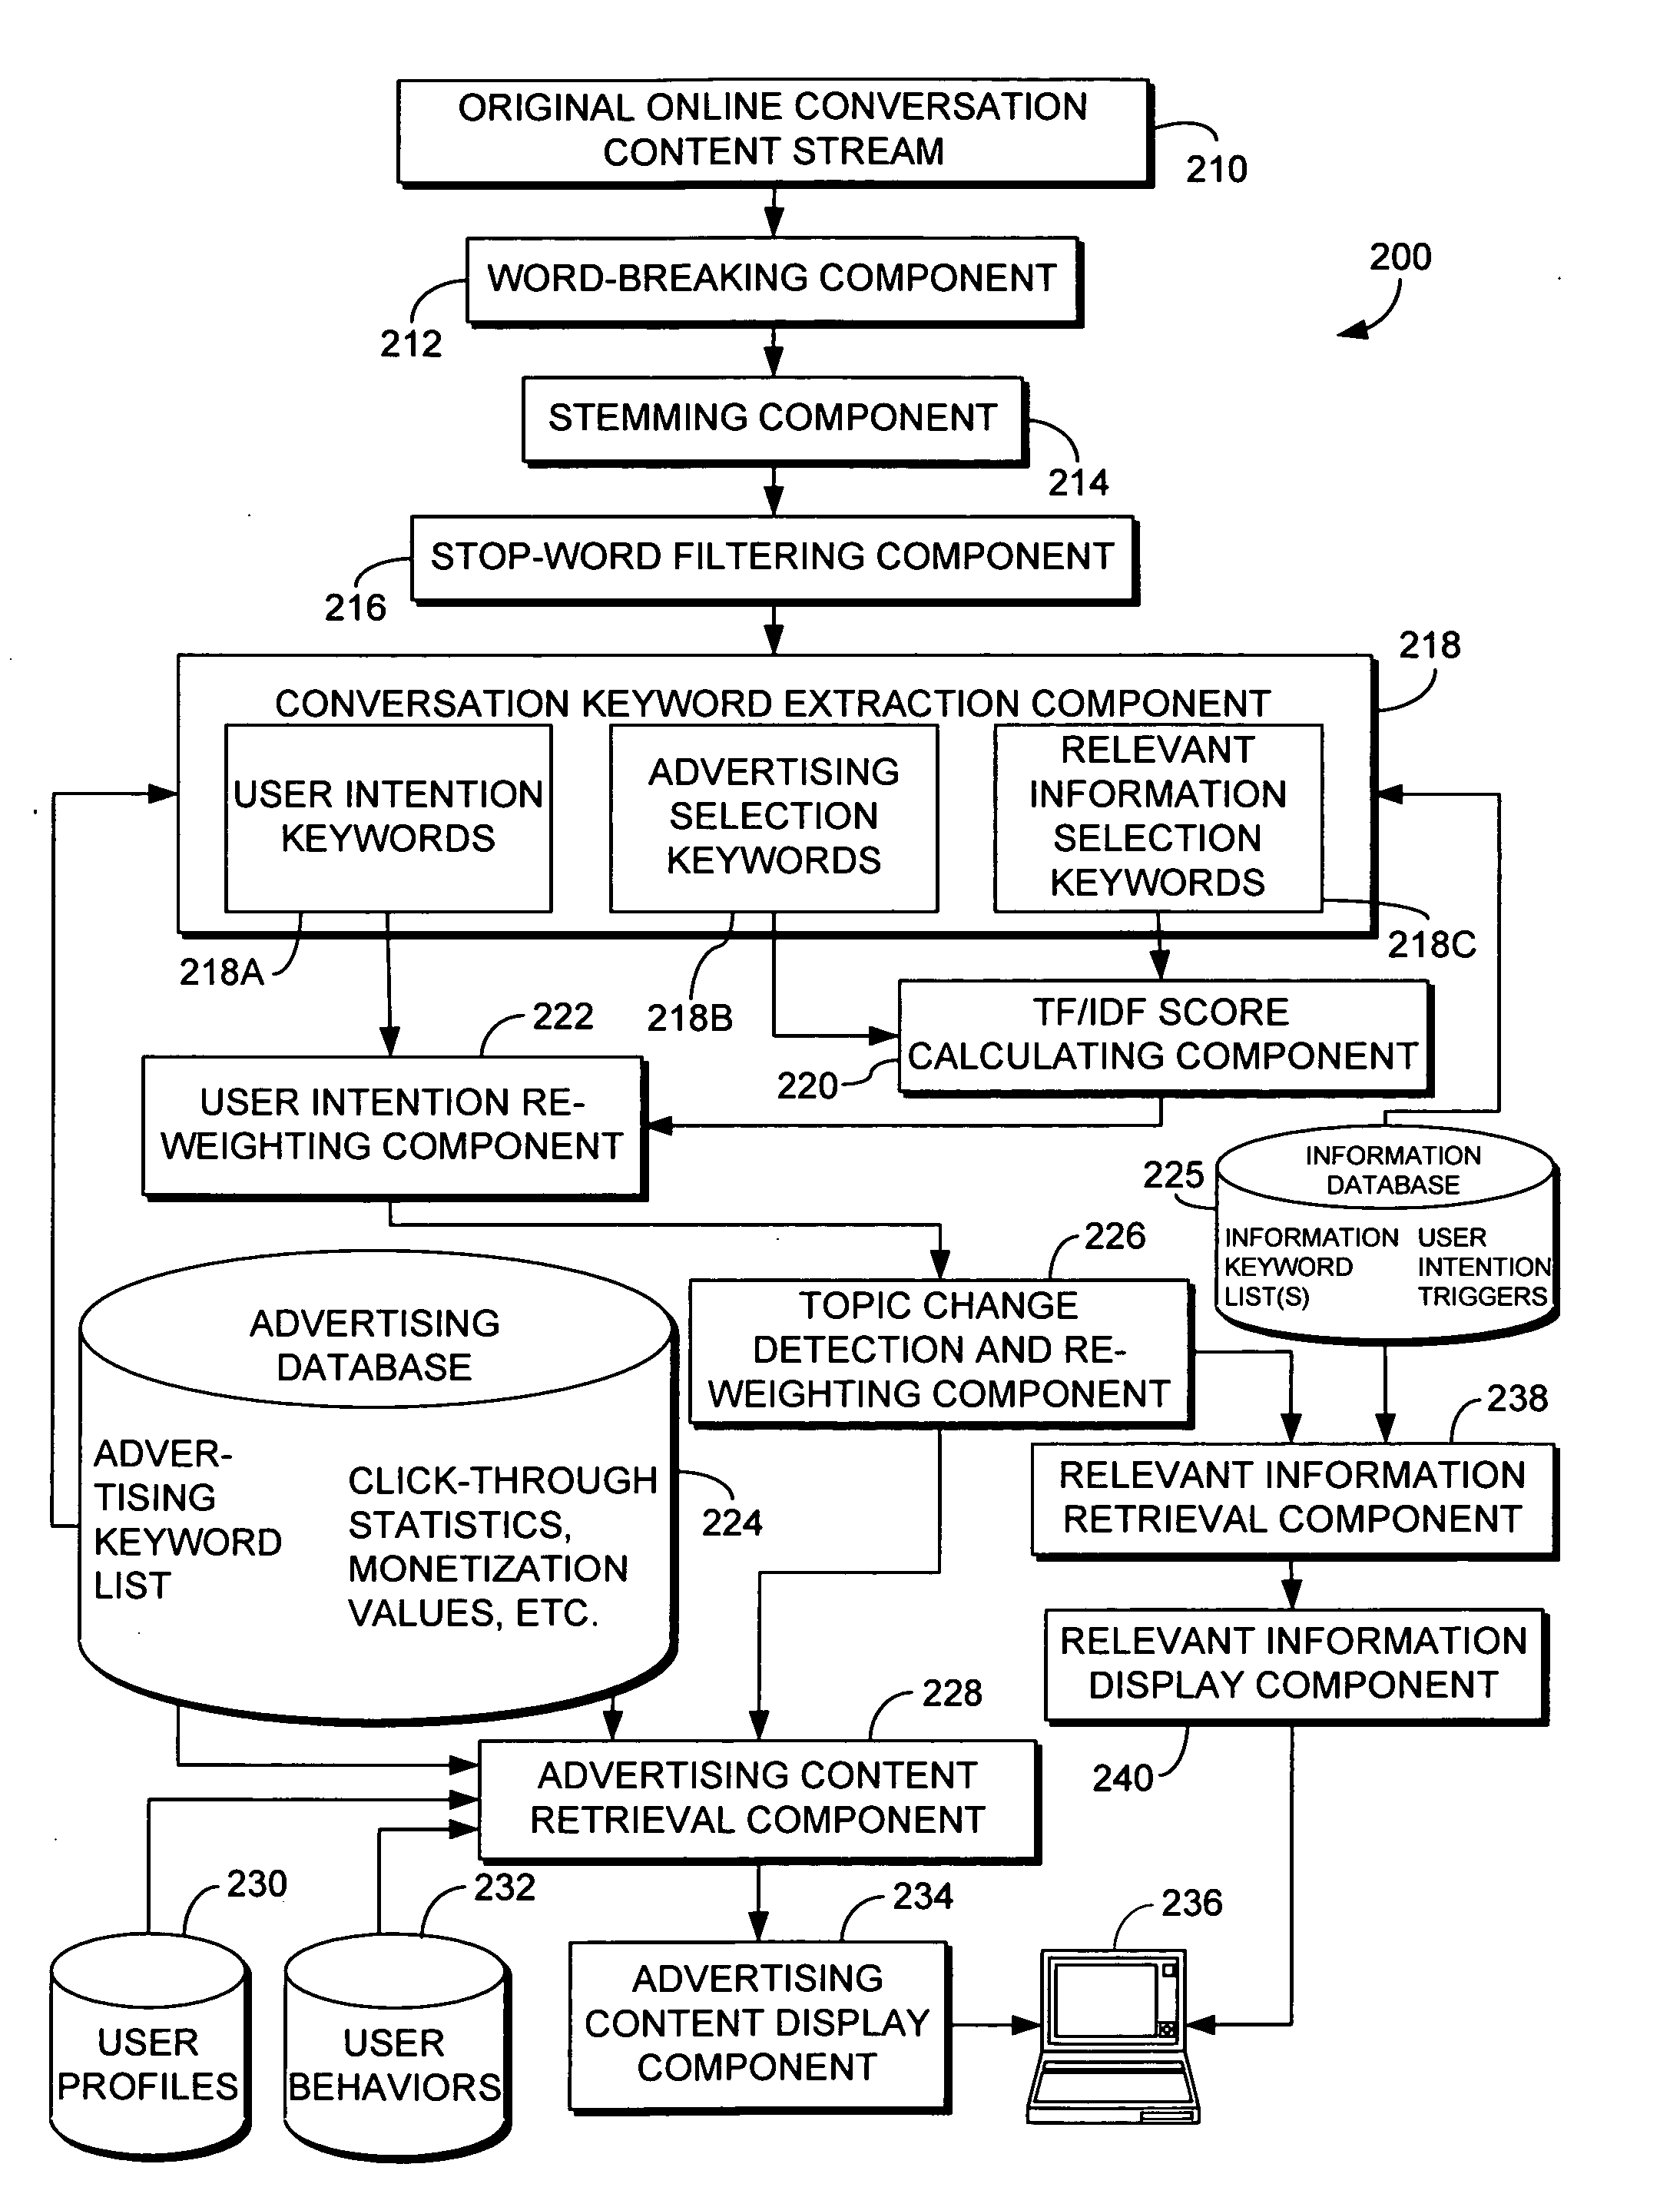 System and method for utilizing the content of an online conversation to select advertising content and/or other relevant information for display